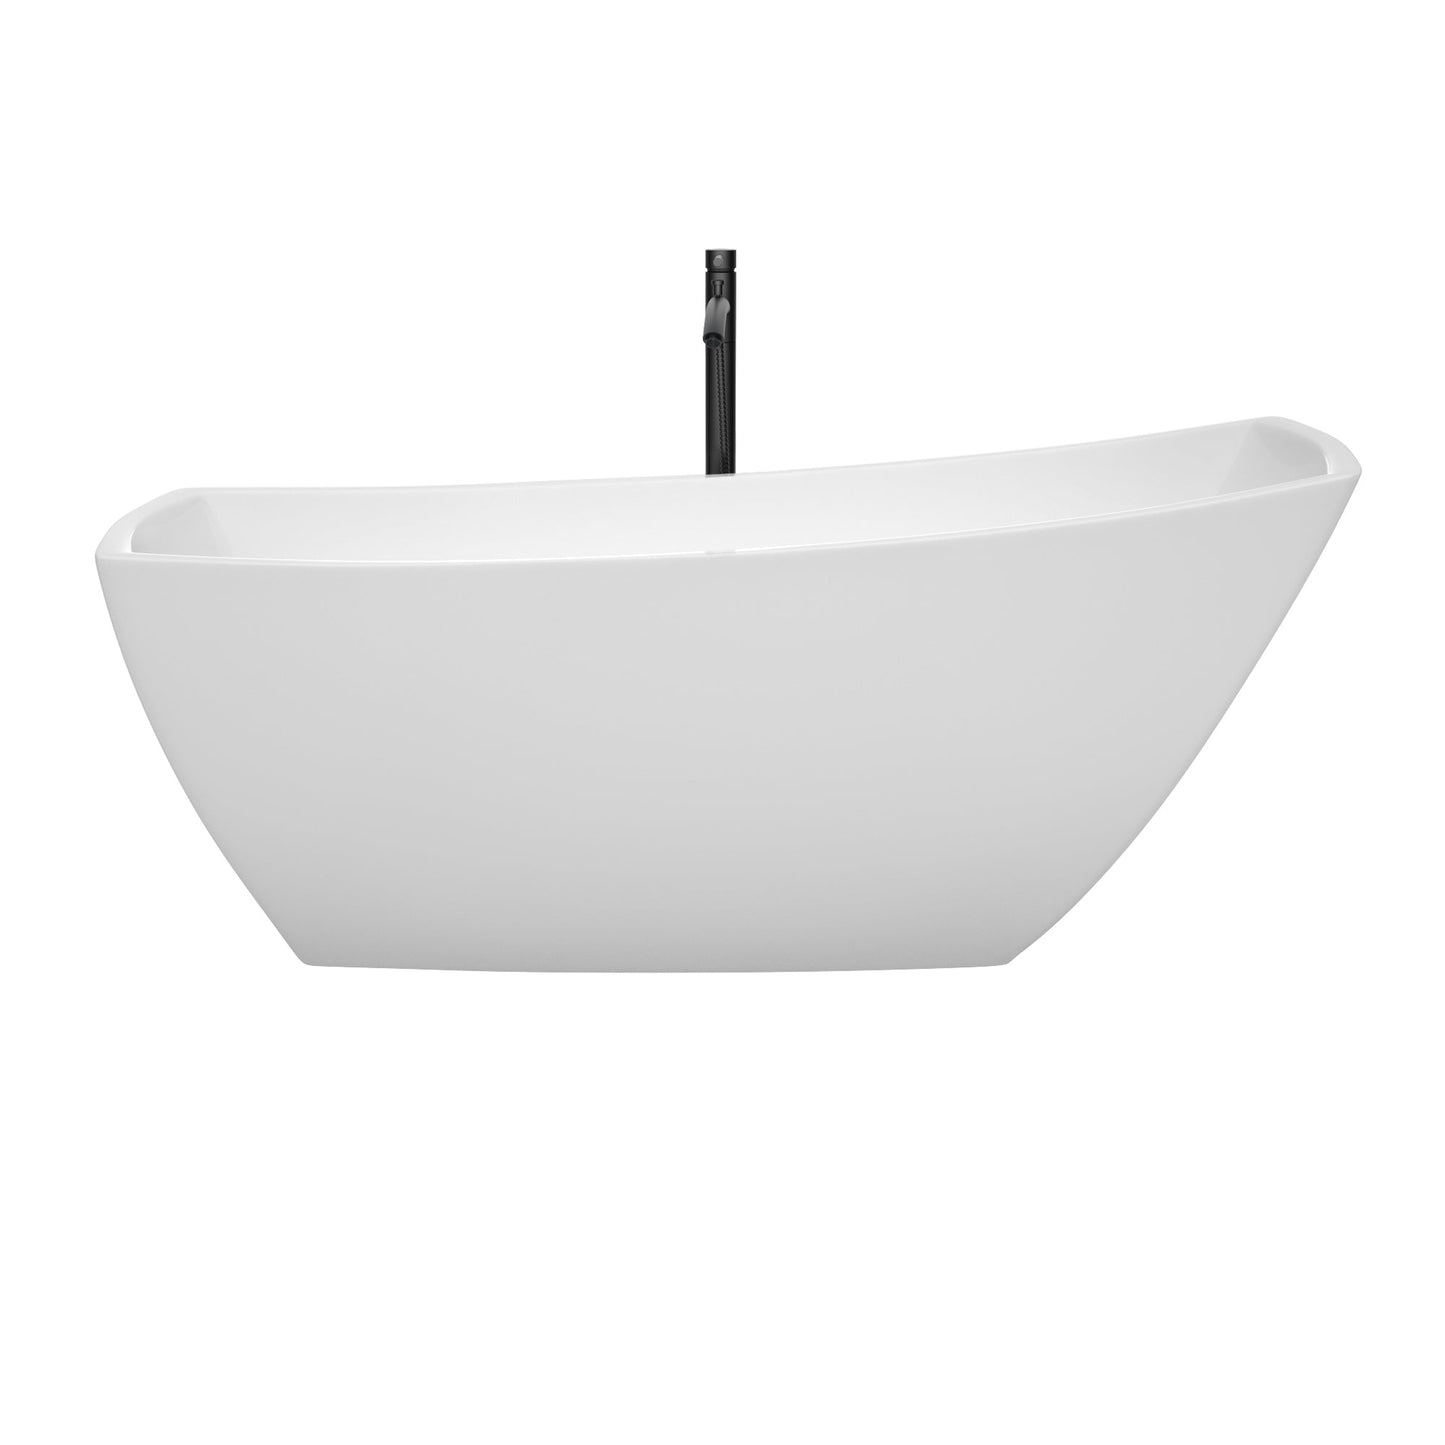 Wyndham Collection Antigua 67" Freestanding Bathtub in White With Floor Mounted Faucet, Drain and Overflow Trim in Matte Black